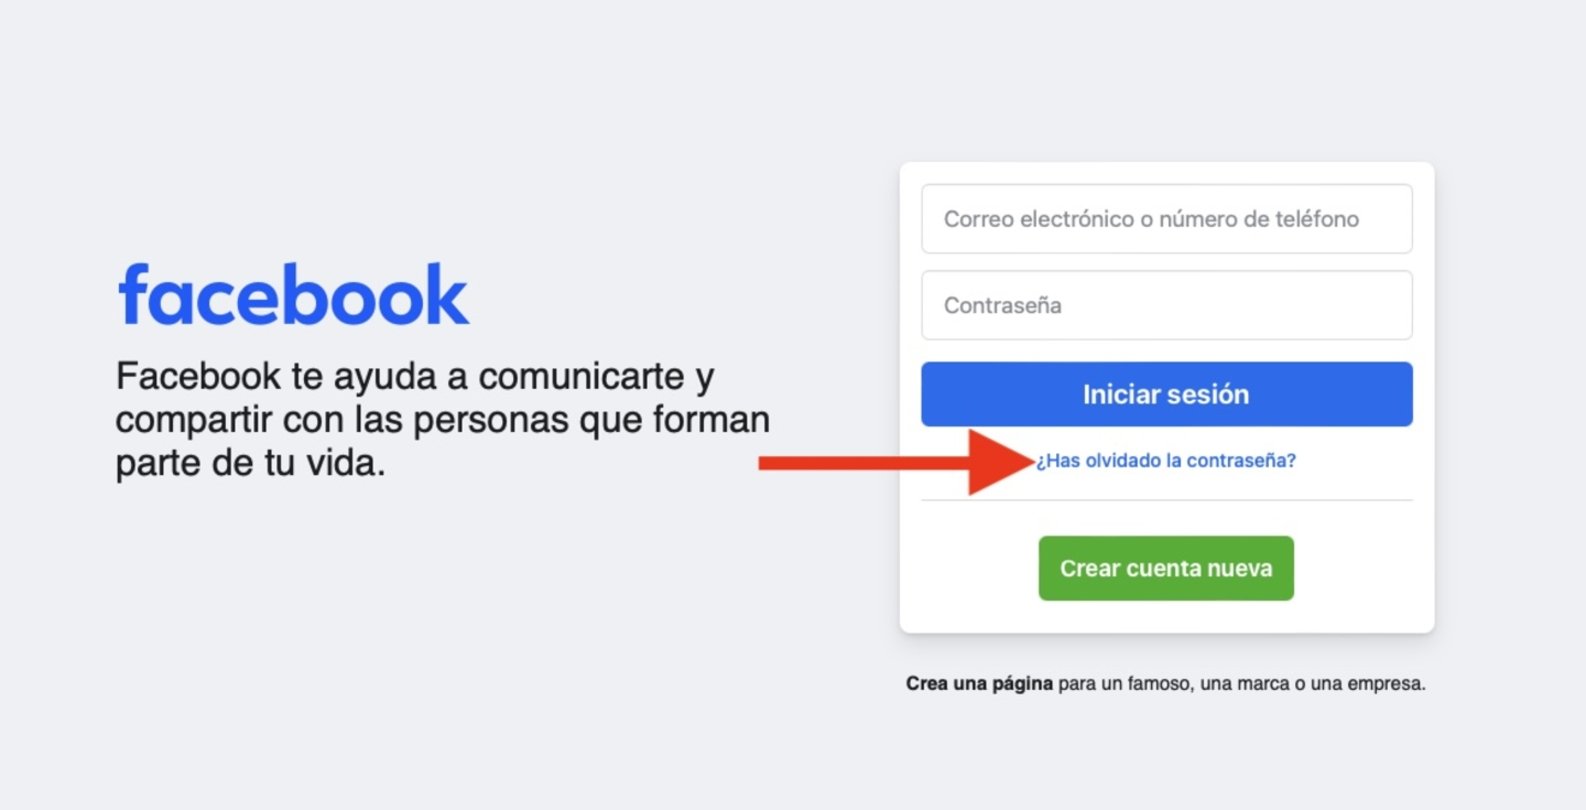 How to recover Facebook password step by step